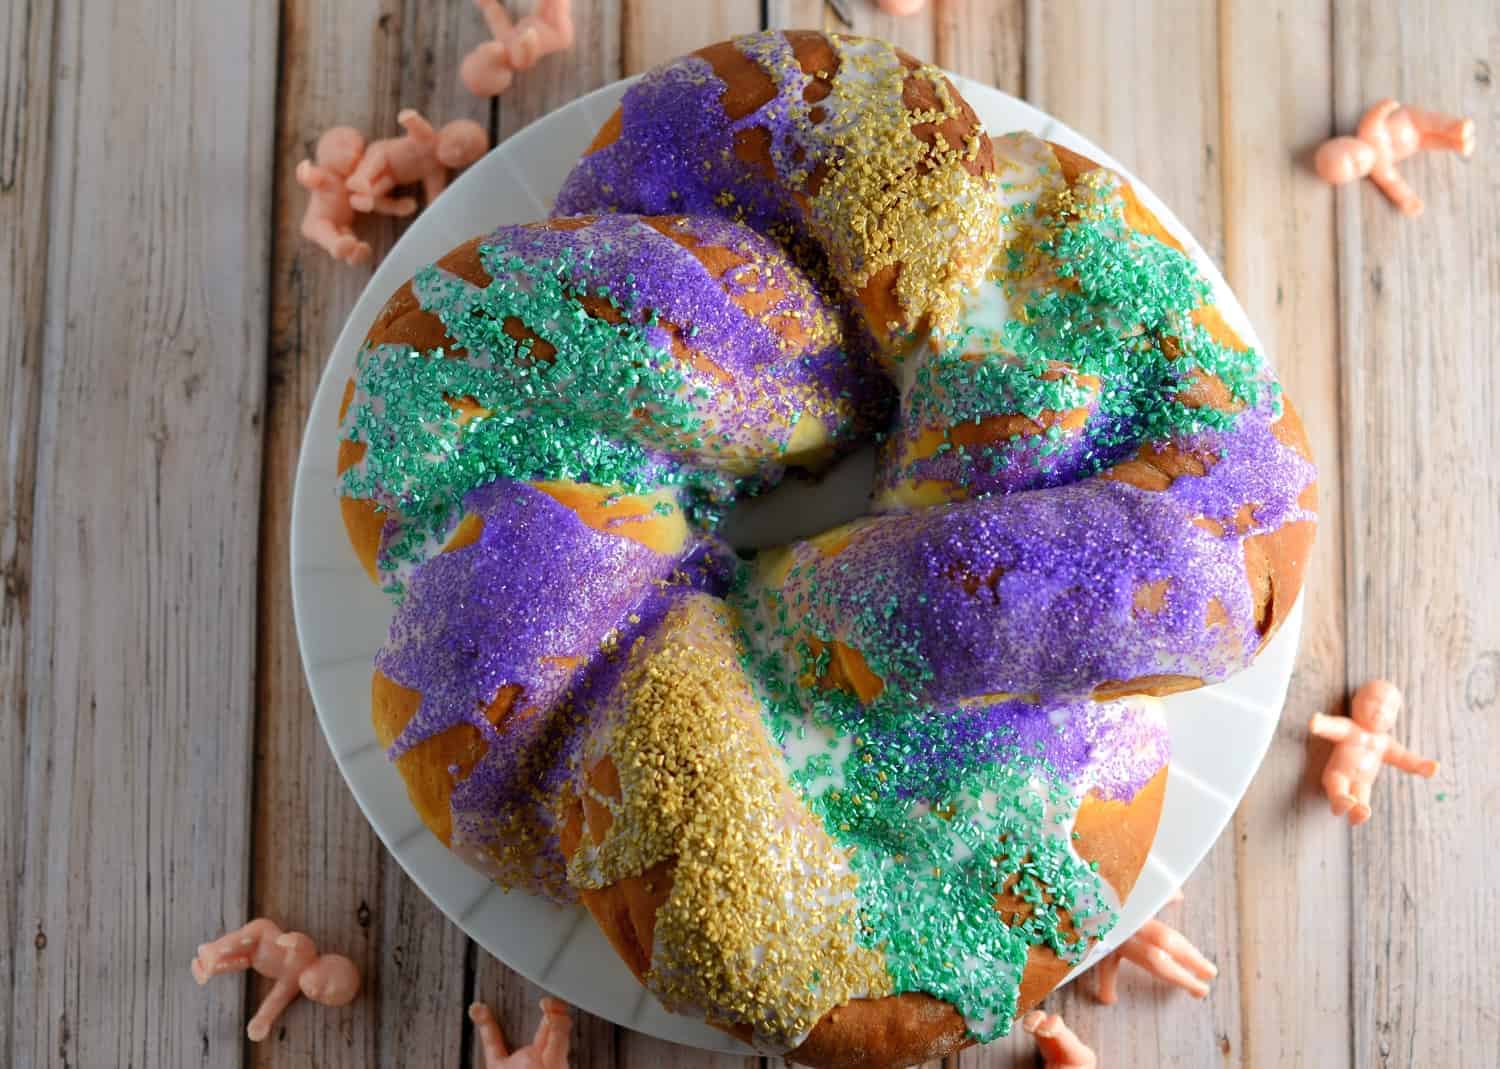 In New Orleans, King Cake Is a Way to Make Joy - The New York Times